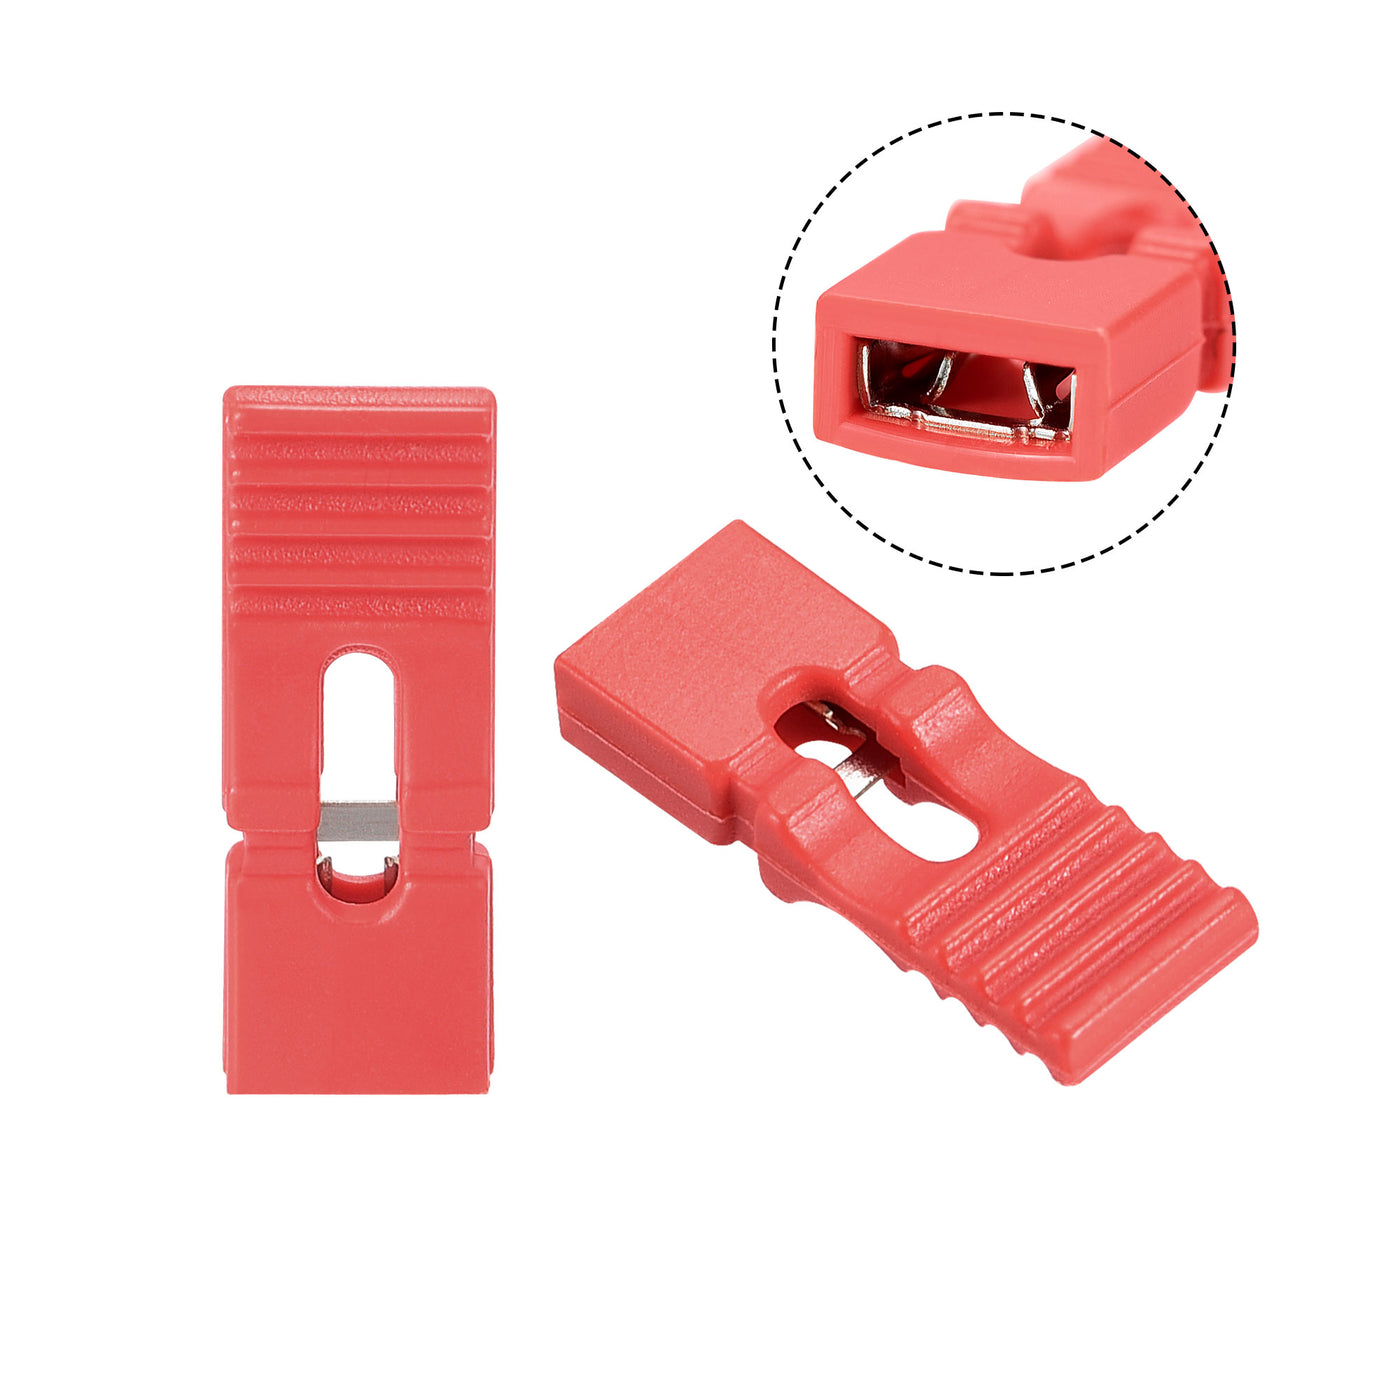 uxcell Uxcell 50pcs 2.54mm Jumper Cap Lengthened Short Circuit Connection Cap Red